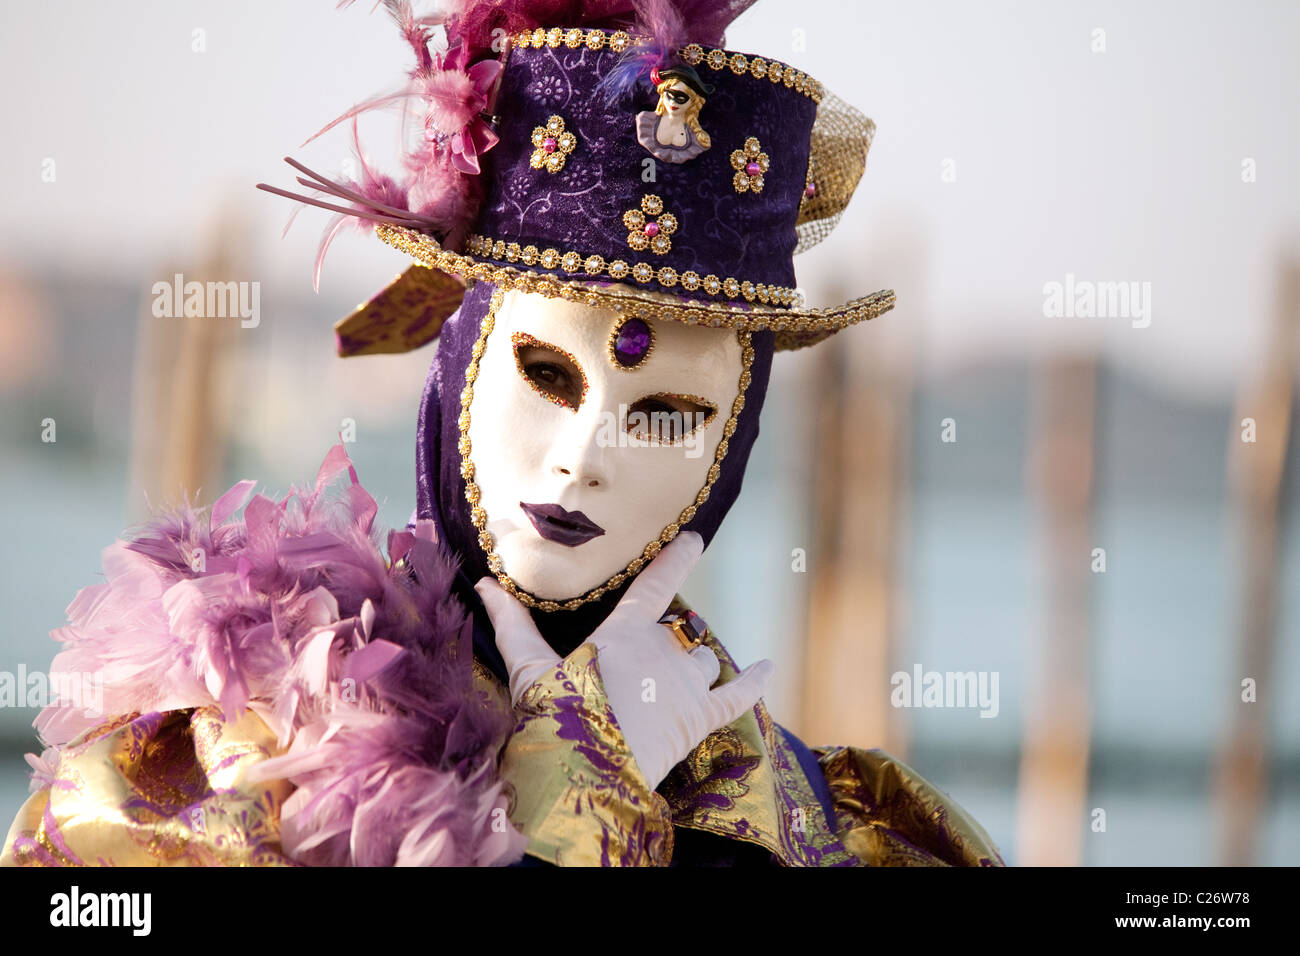 Character in costume, the Carnival, Venice, Italy Stock Photo